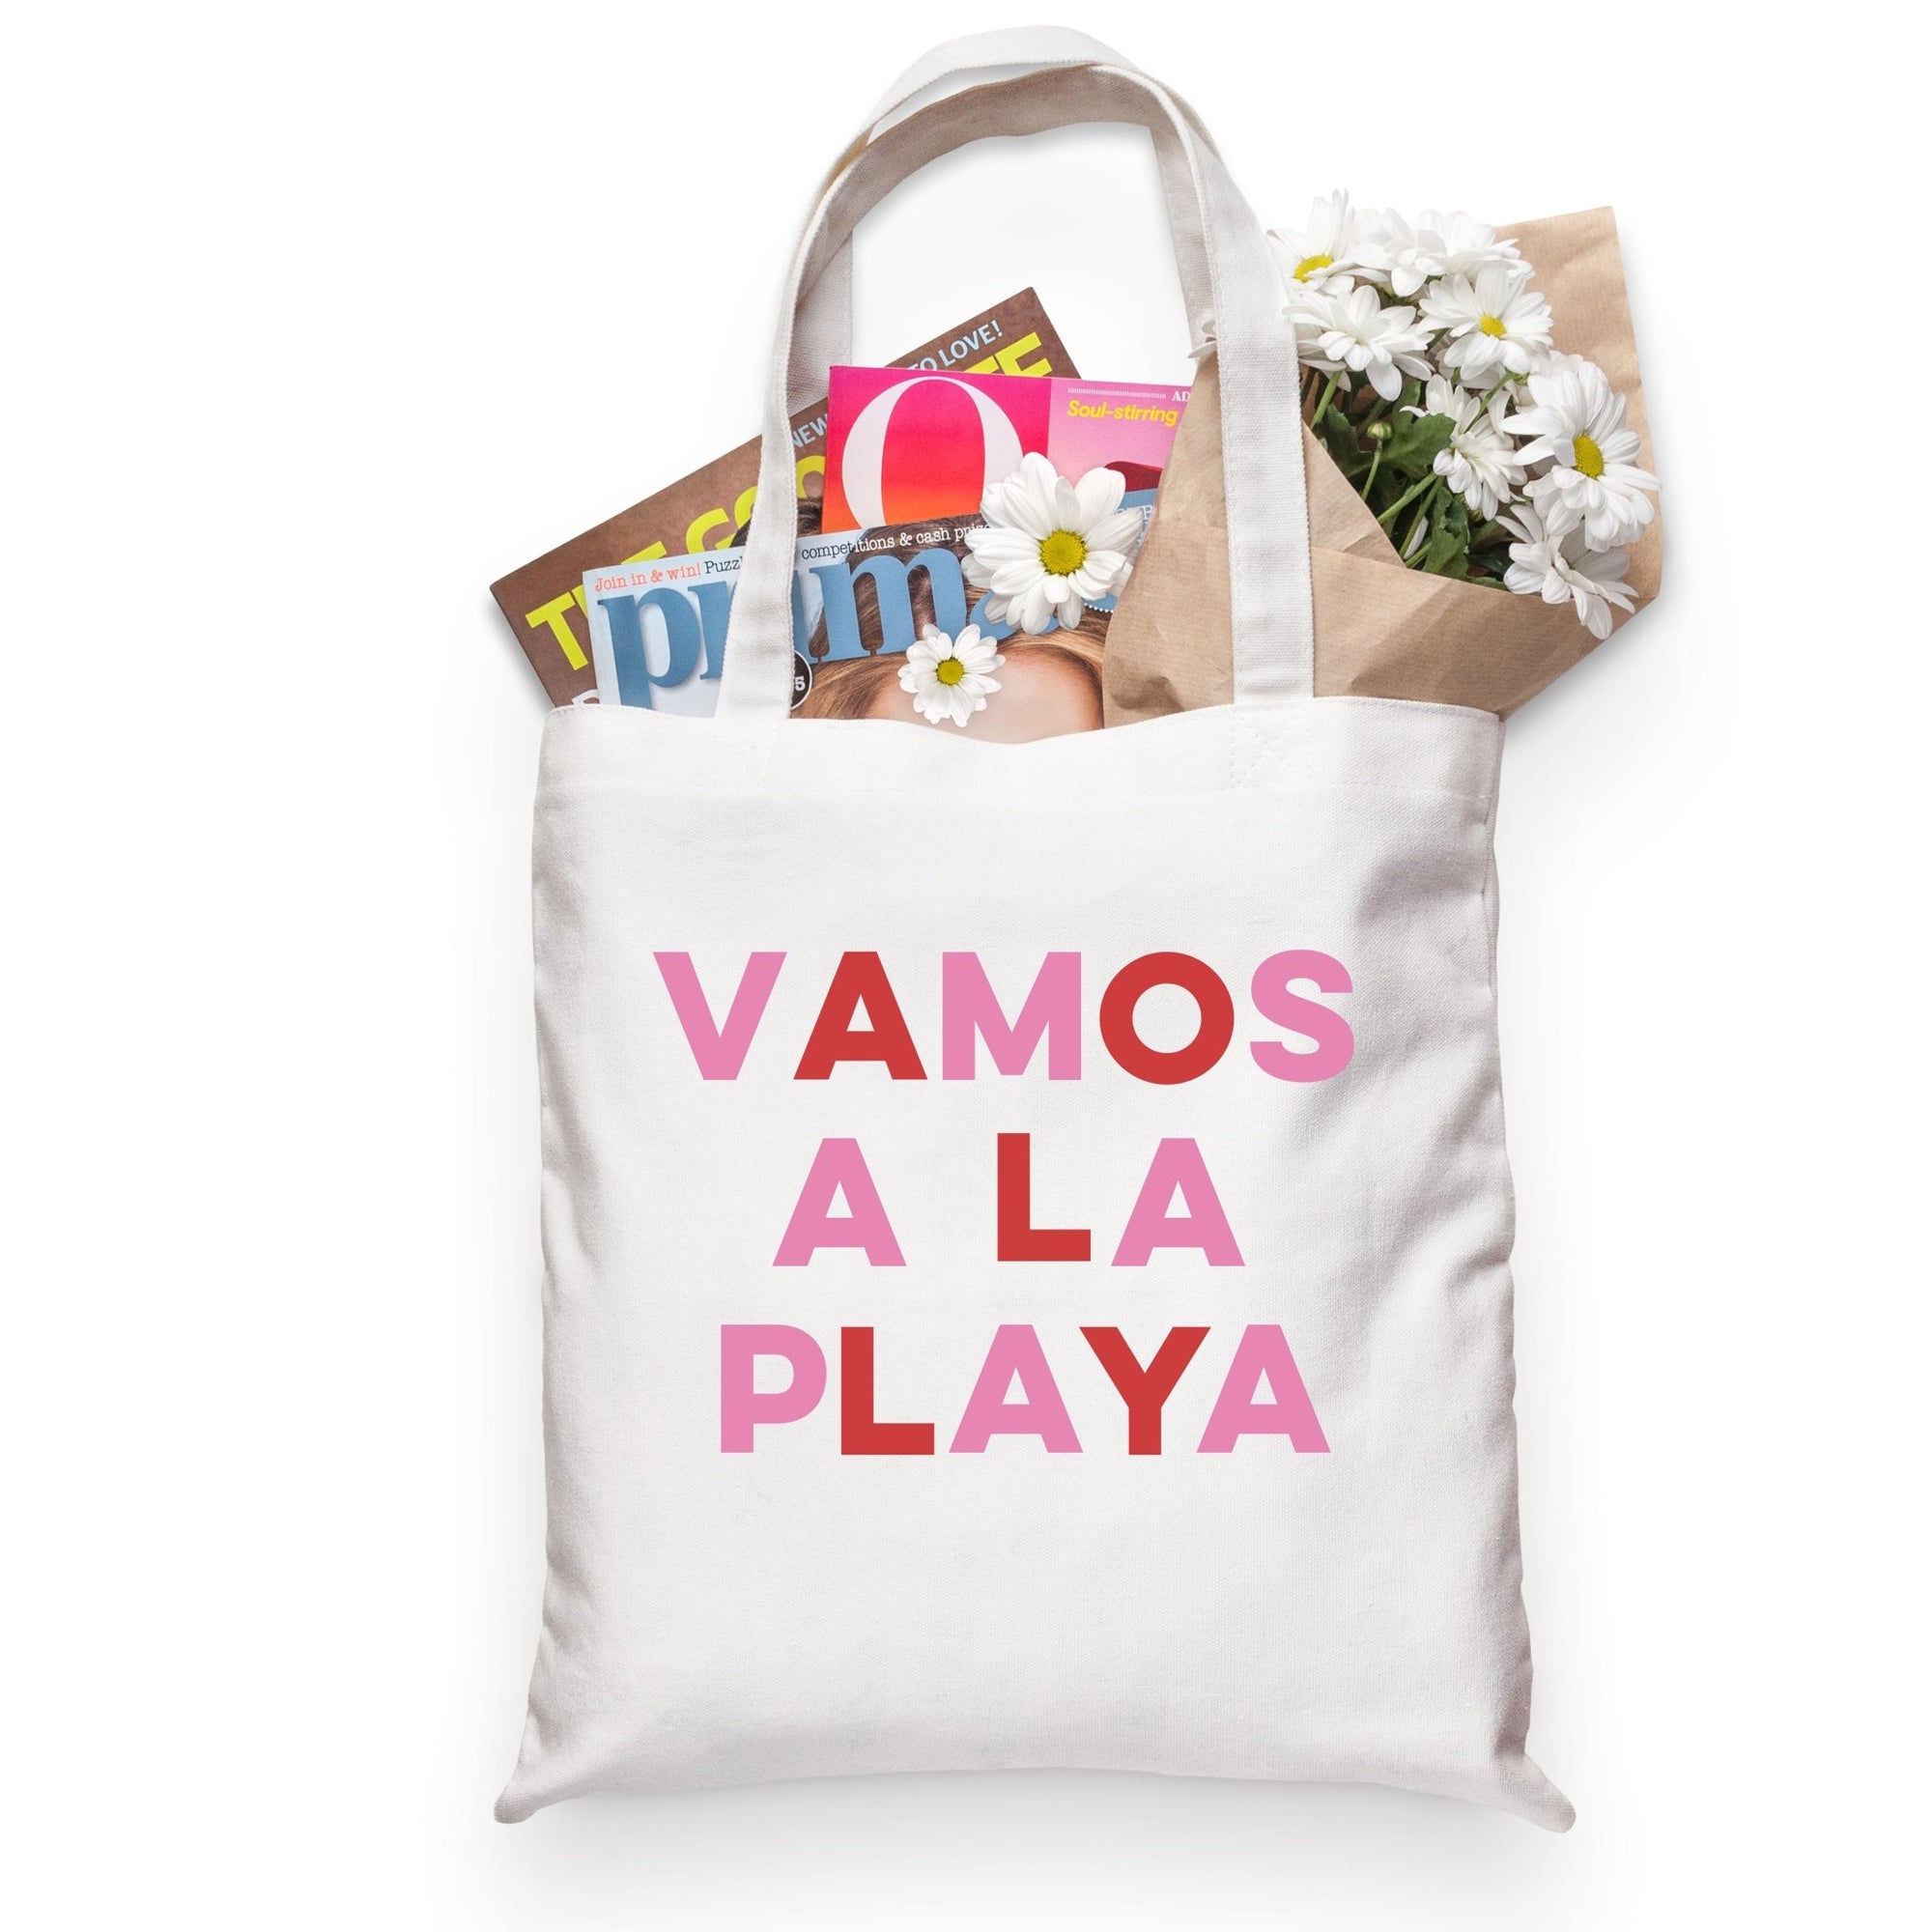 A tote bag filled with magazines and flowers is customized with the phrase "Vamos A La Playa" in pink and red.